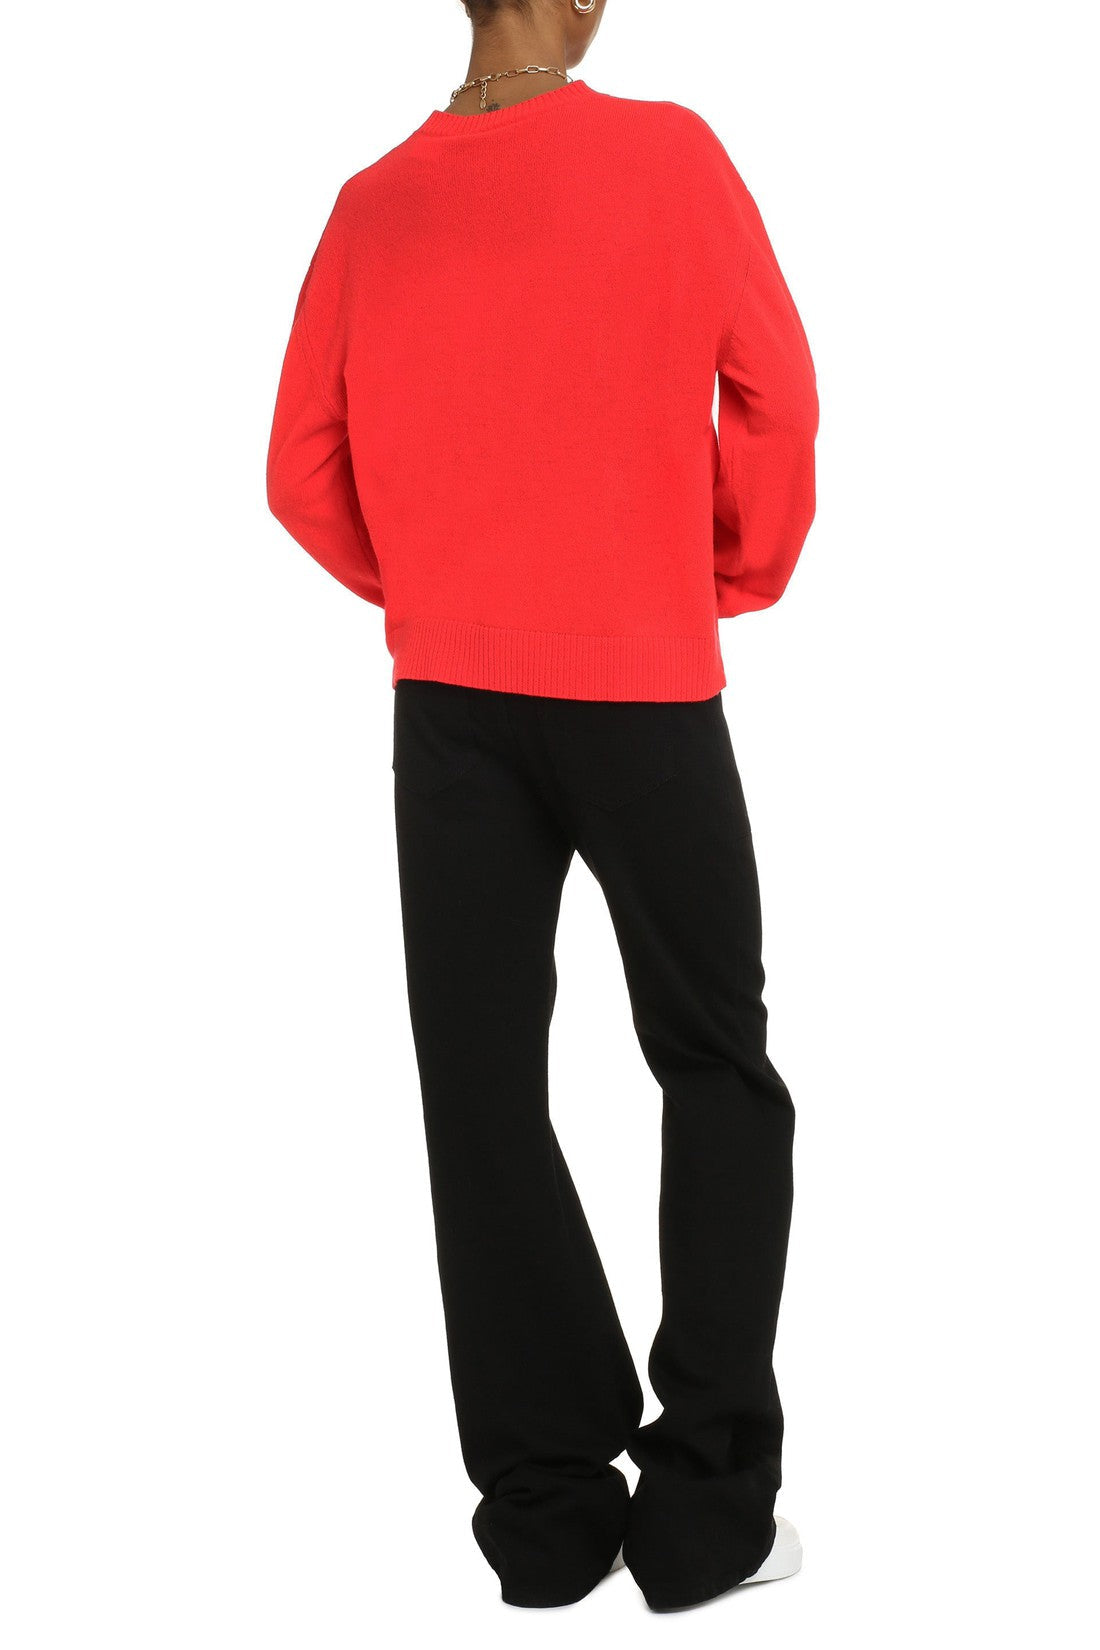 Philosophy di Lorenzo Serafini-OUTLET-SALE-Philosophy x Peanuts™- Wool and cashmere sweater-ARCHIVIST